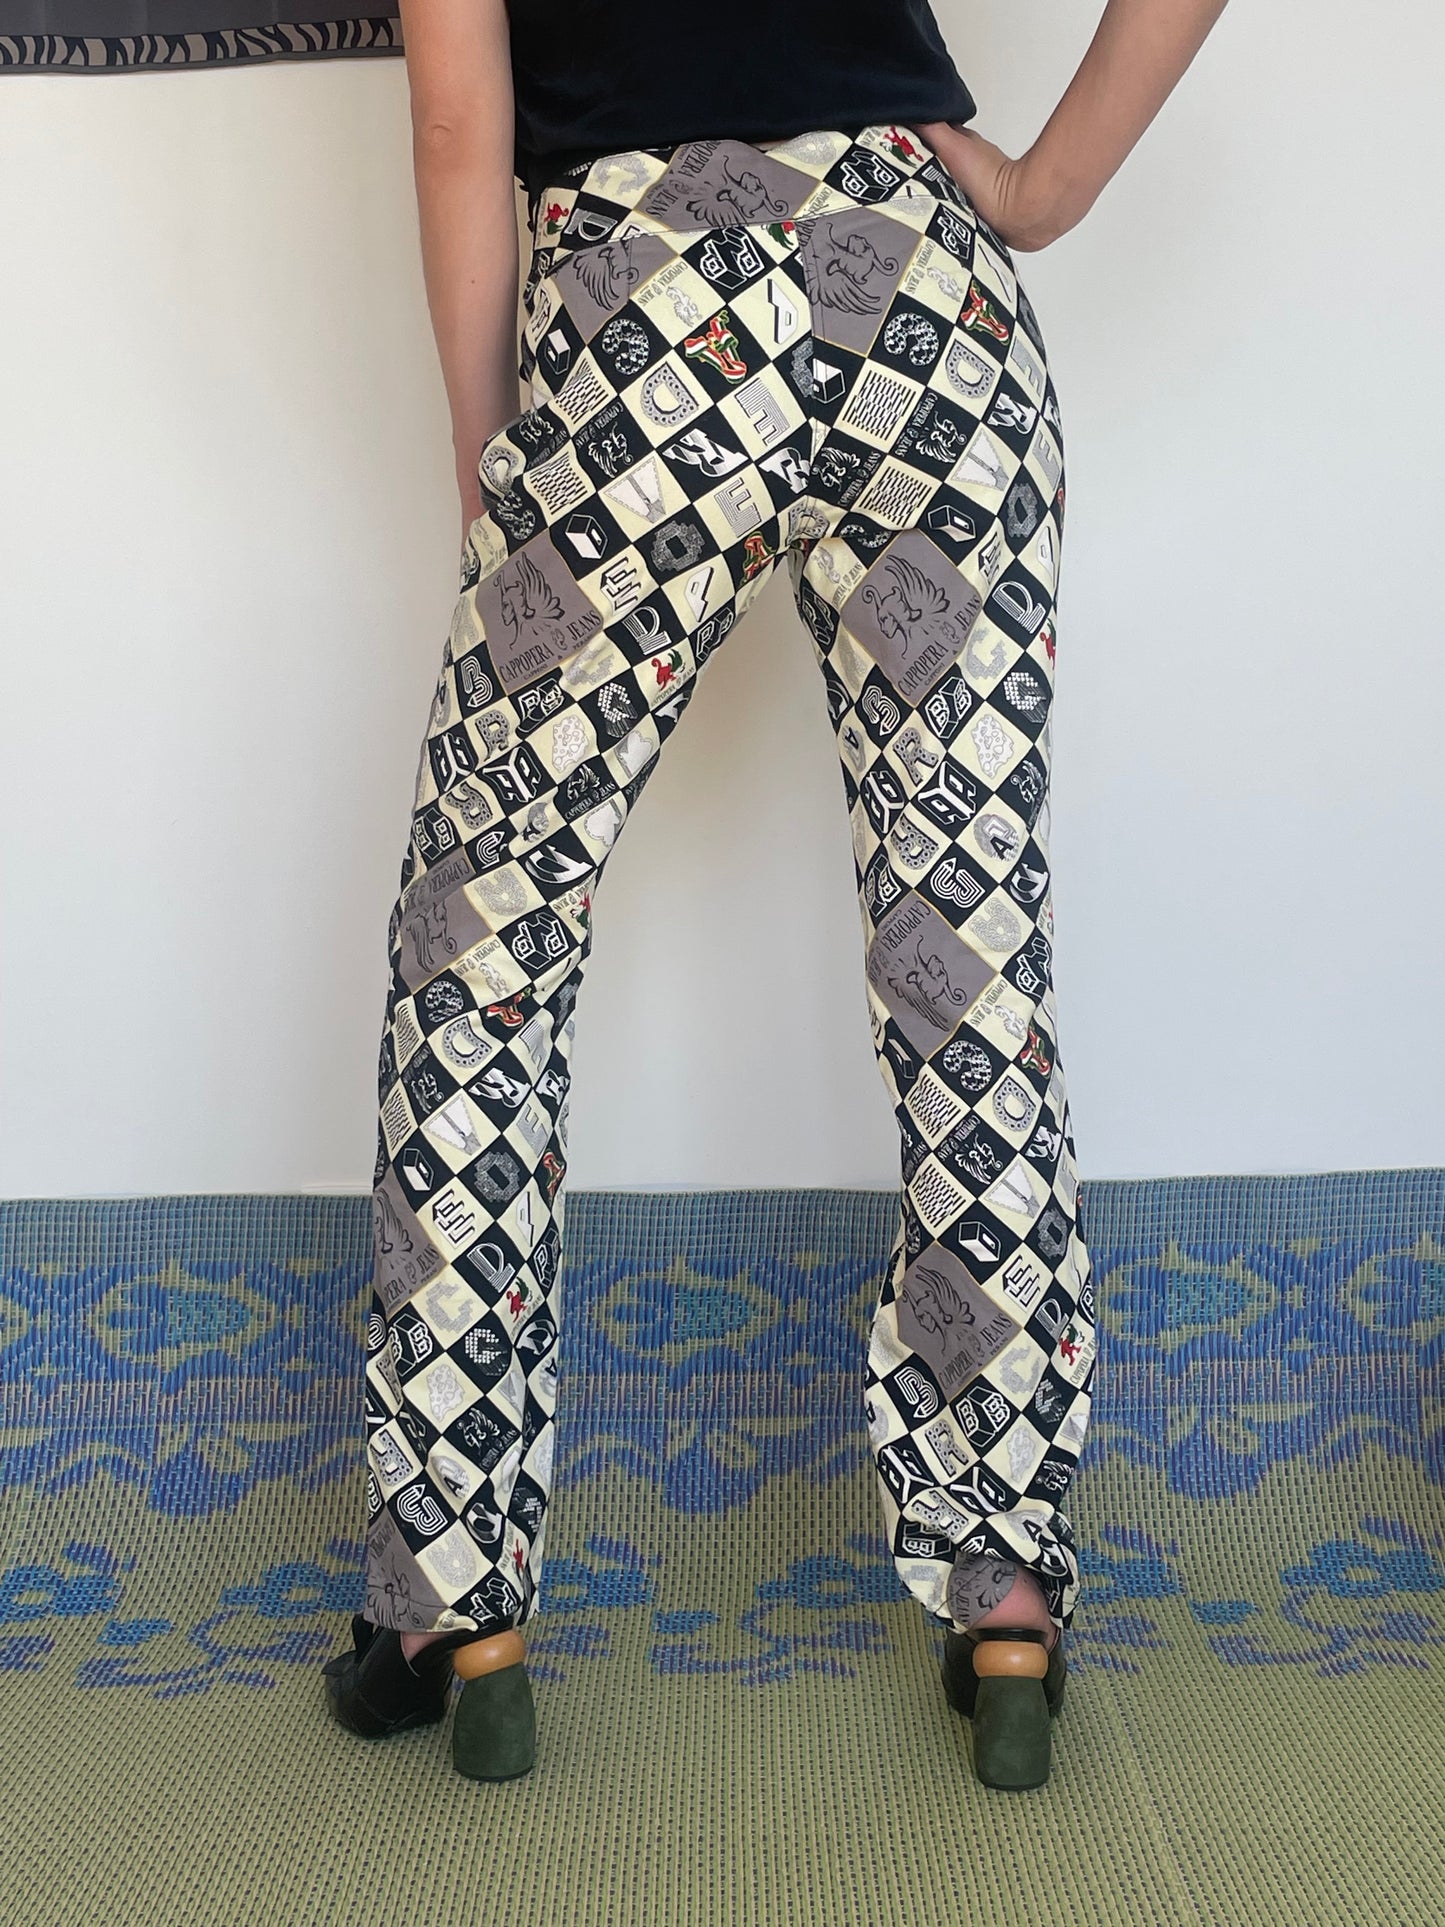 Early 2000's Cappopera checkered pants with a crazy fonts and symbol print